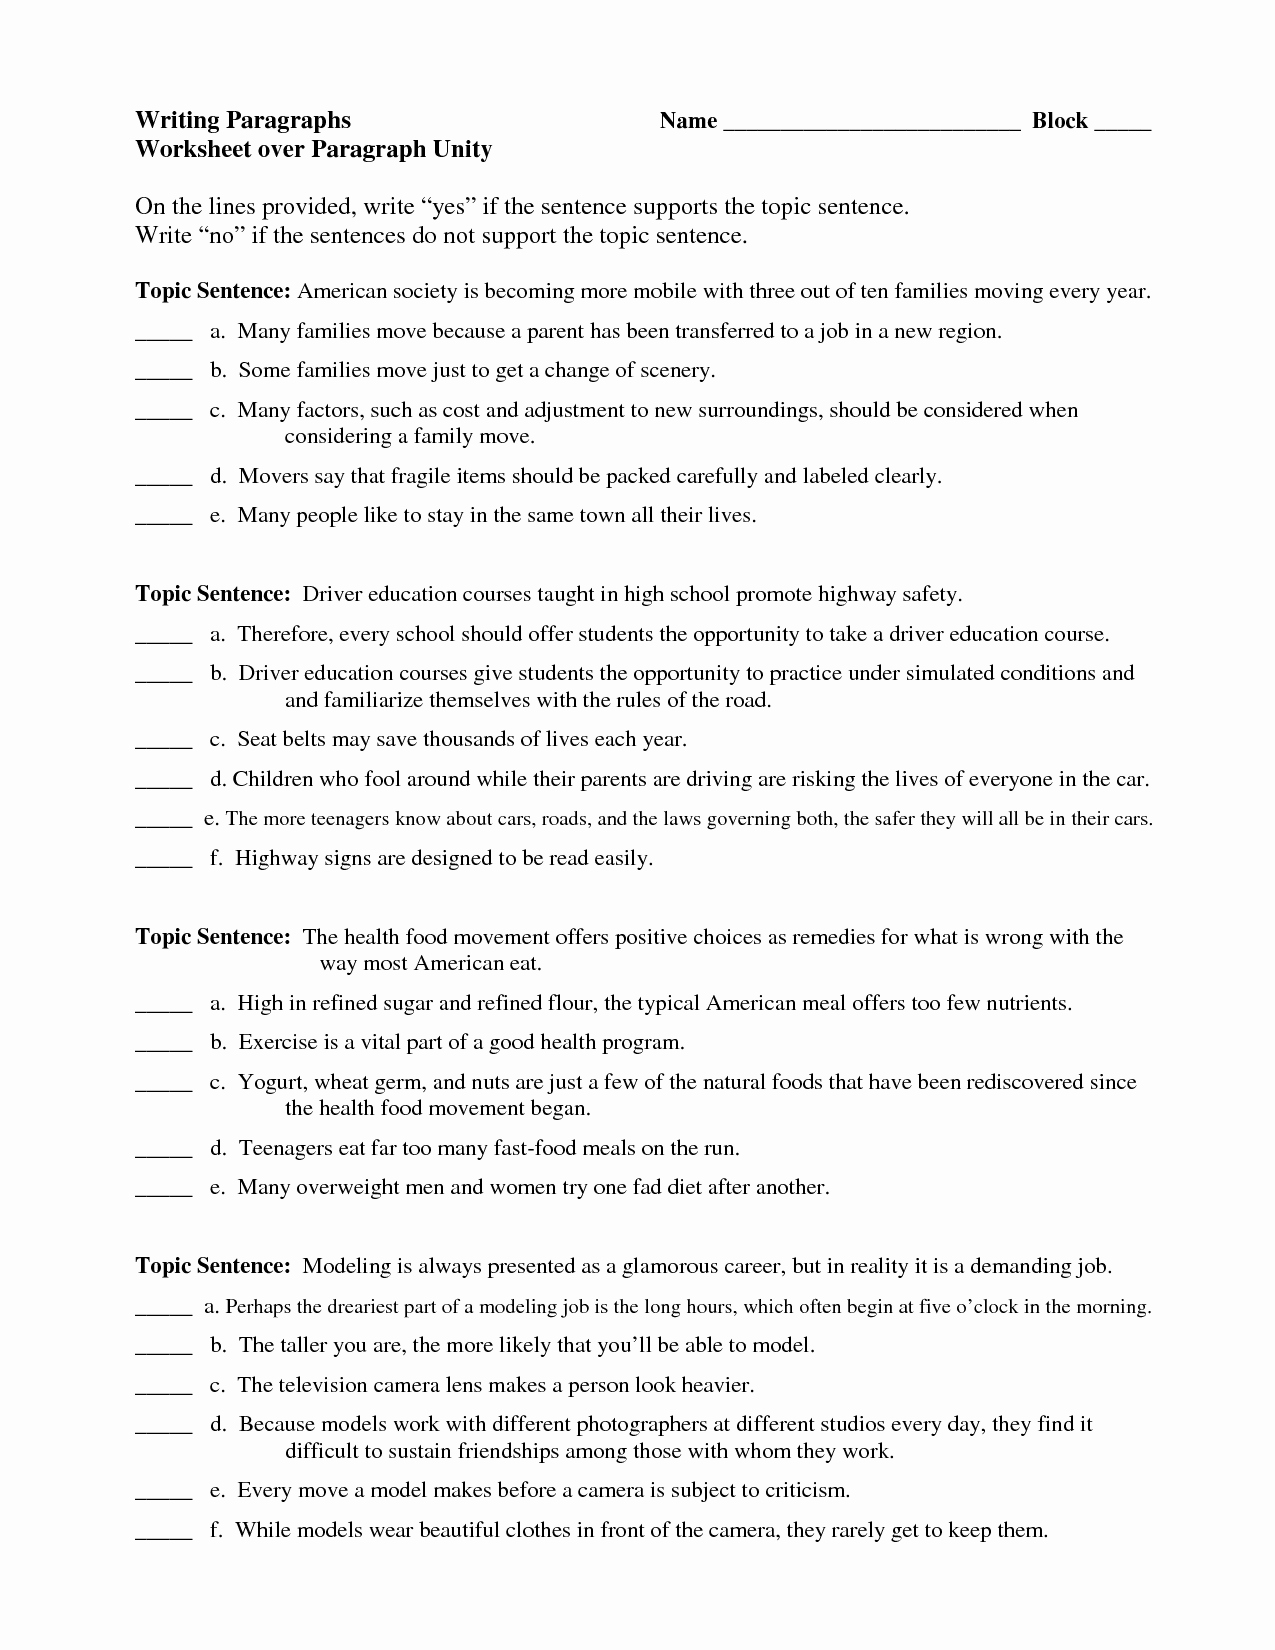 Writing A thesis Statement Worksheet Luxury Literary Analysis thesis Statement Worksheet